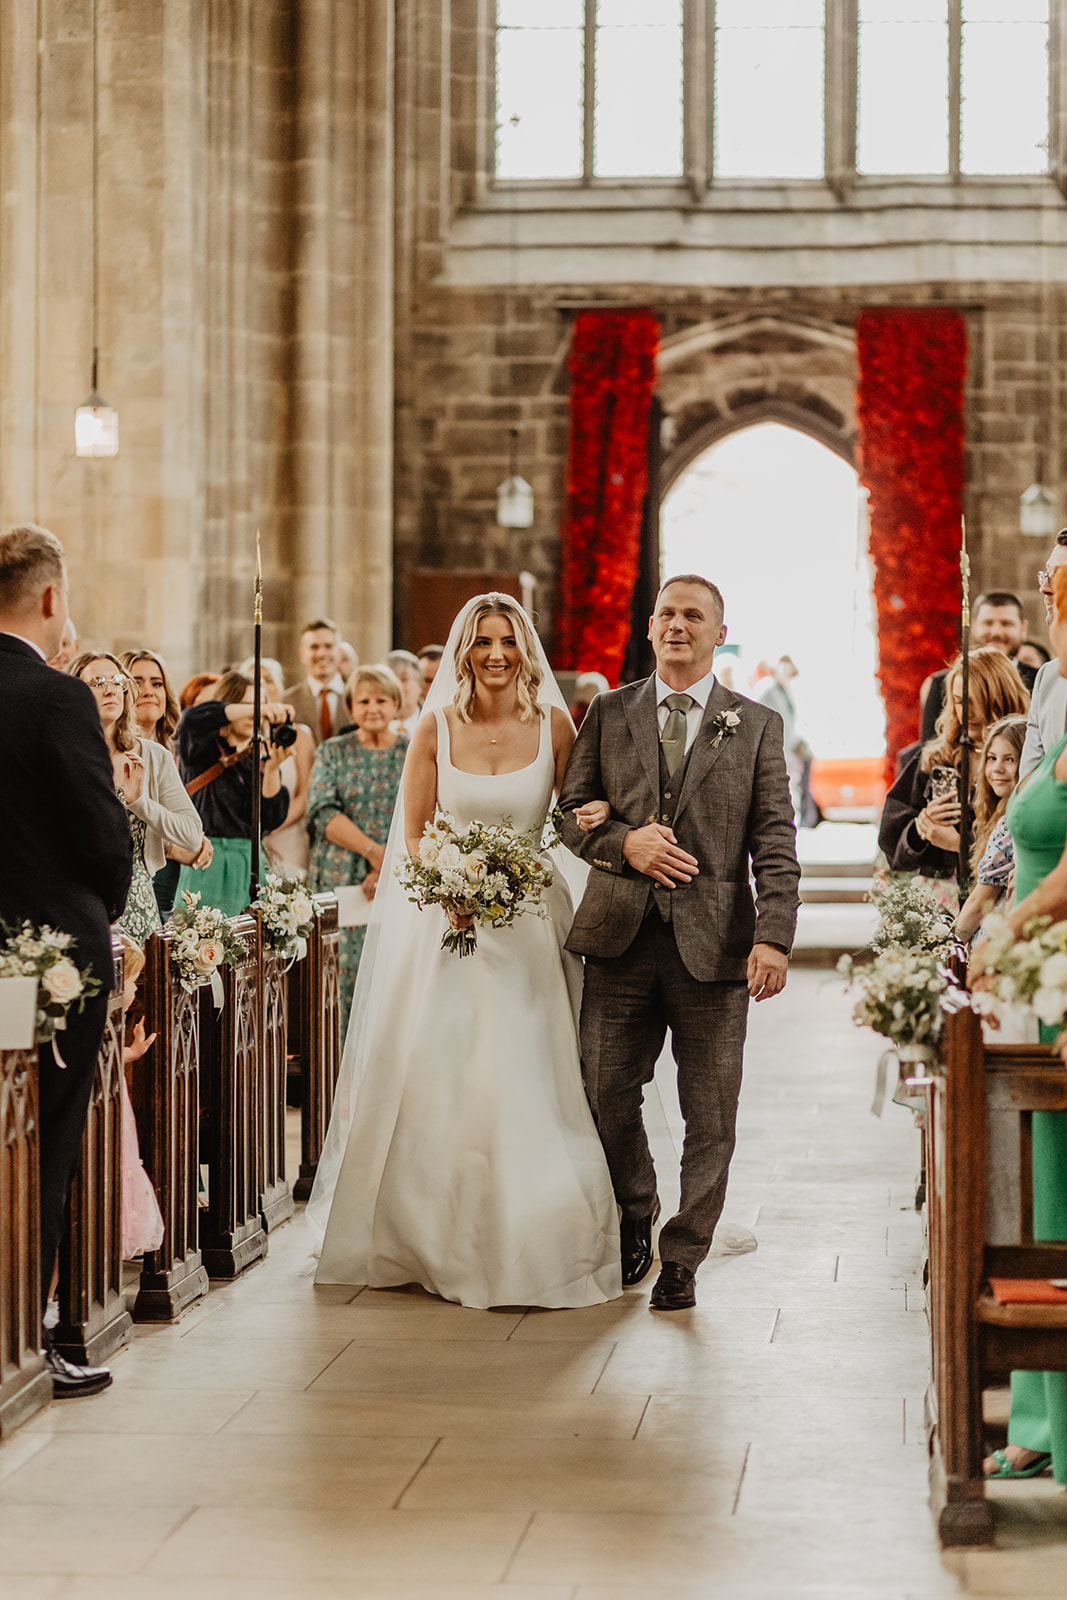 Bride and her father at a Great Tythe Barn Wedding, Cotswolds. By Olive Joy Photography.